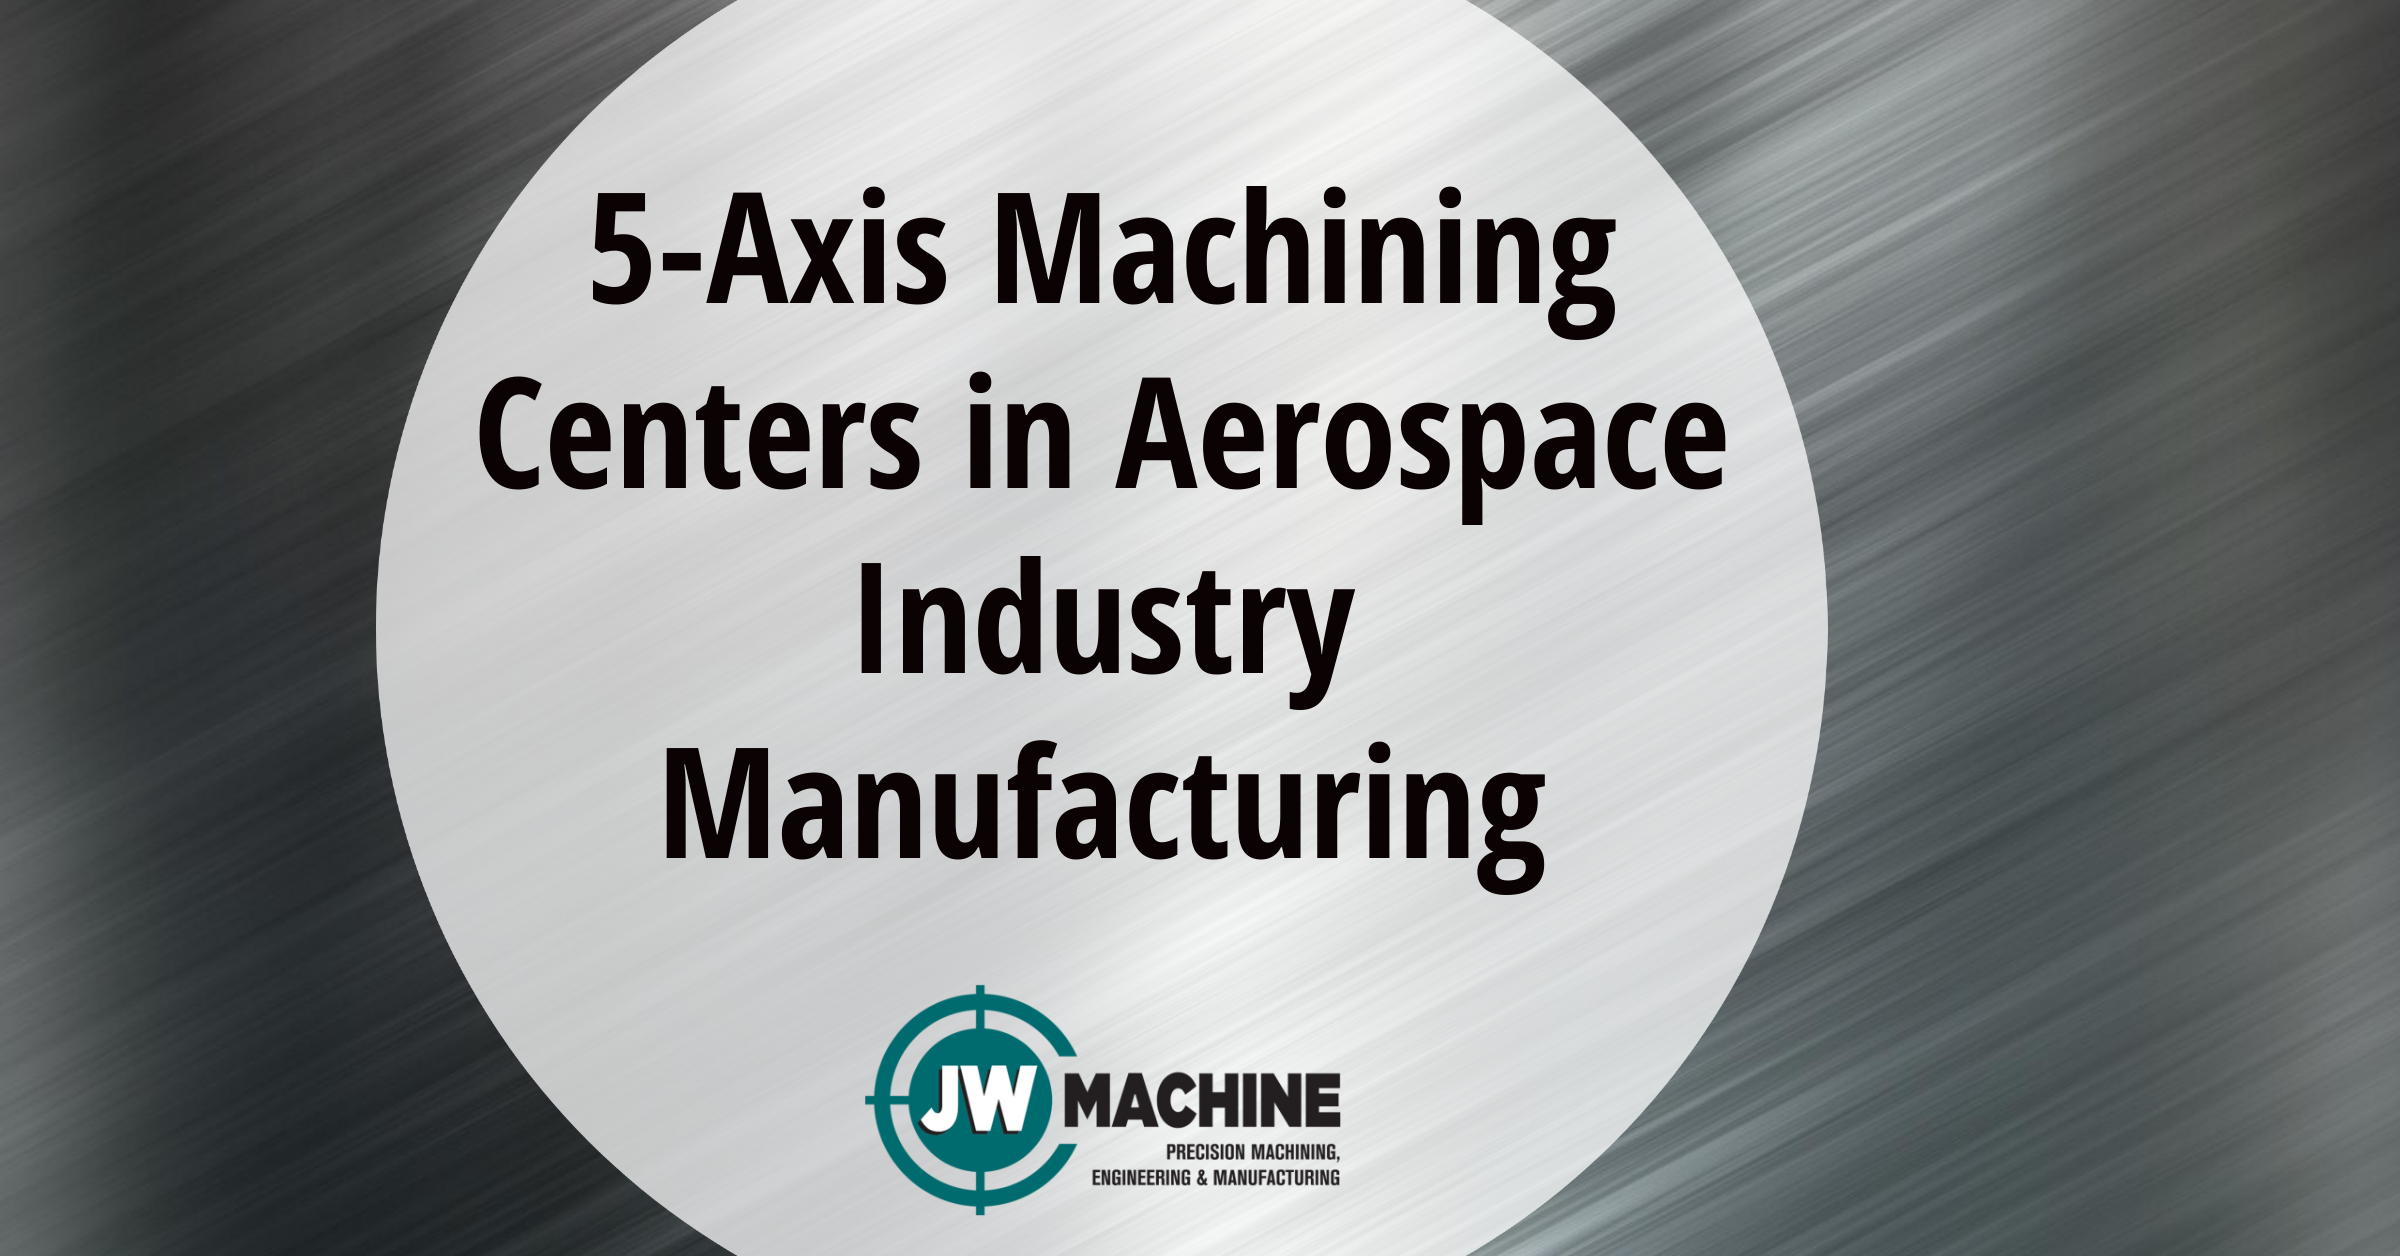 5-Axis Machining Centers in Aerospace Industry Manufacturing